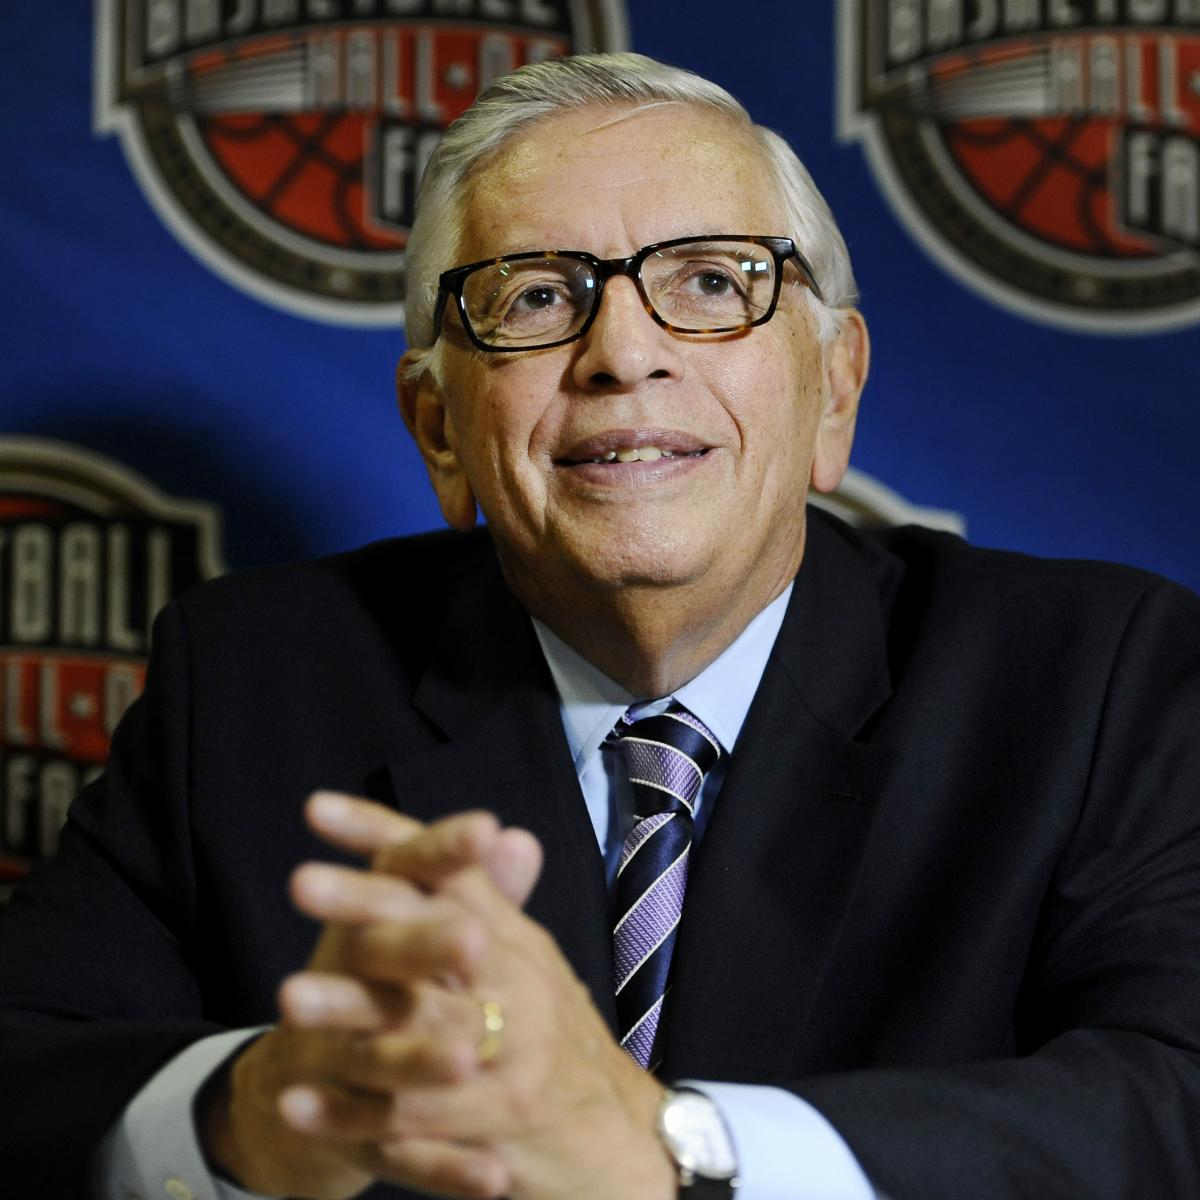 NBA at 75: David Stern launches game-changing WNBA in 1997